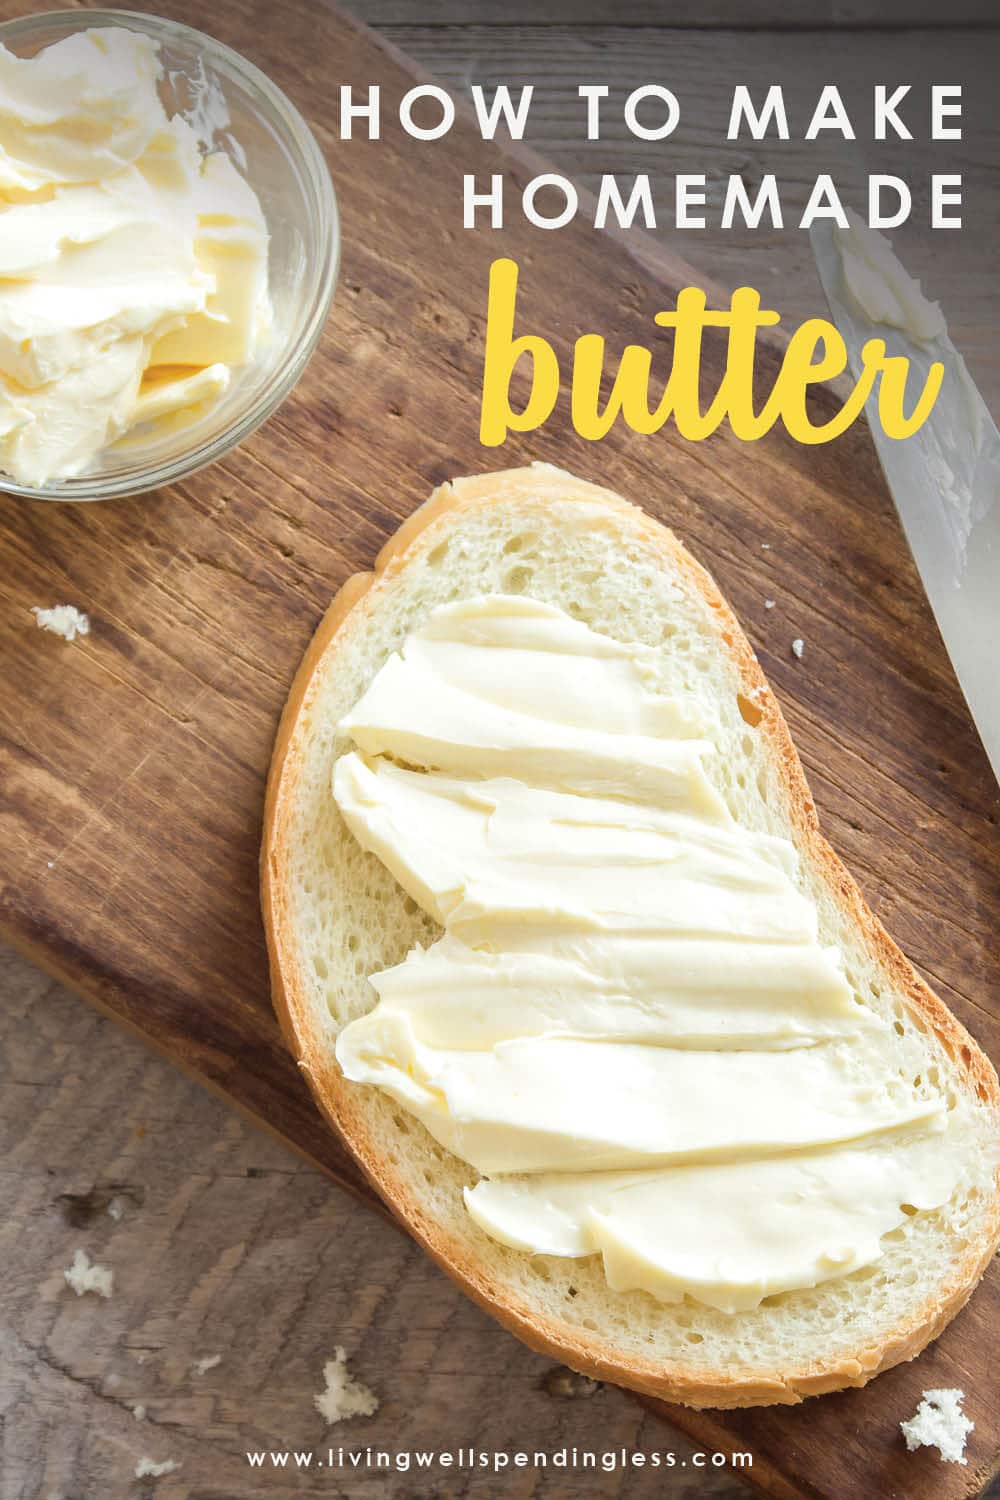 How to Make Homemade Butter  Make Butter in a Stand Mixer